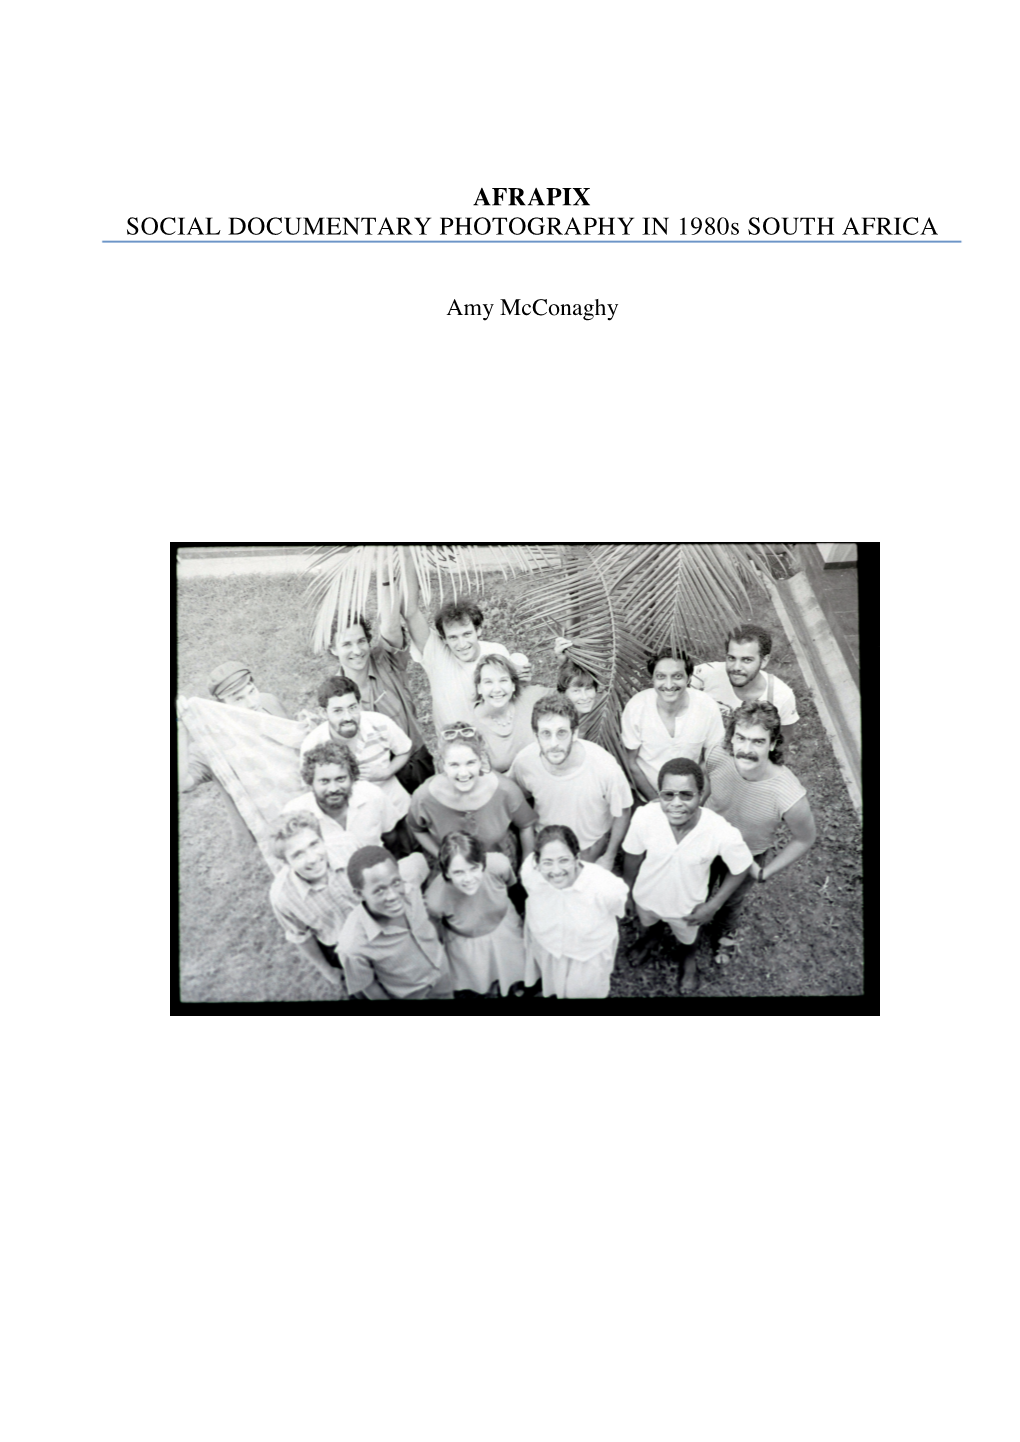 AFRAPIX SOCIAL DOCUMENTARY PHOTOGRAPHY in 1980S SOUTH AFRICA